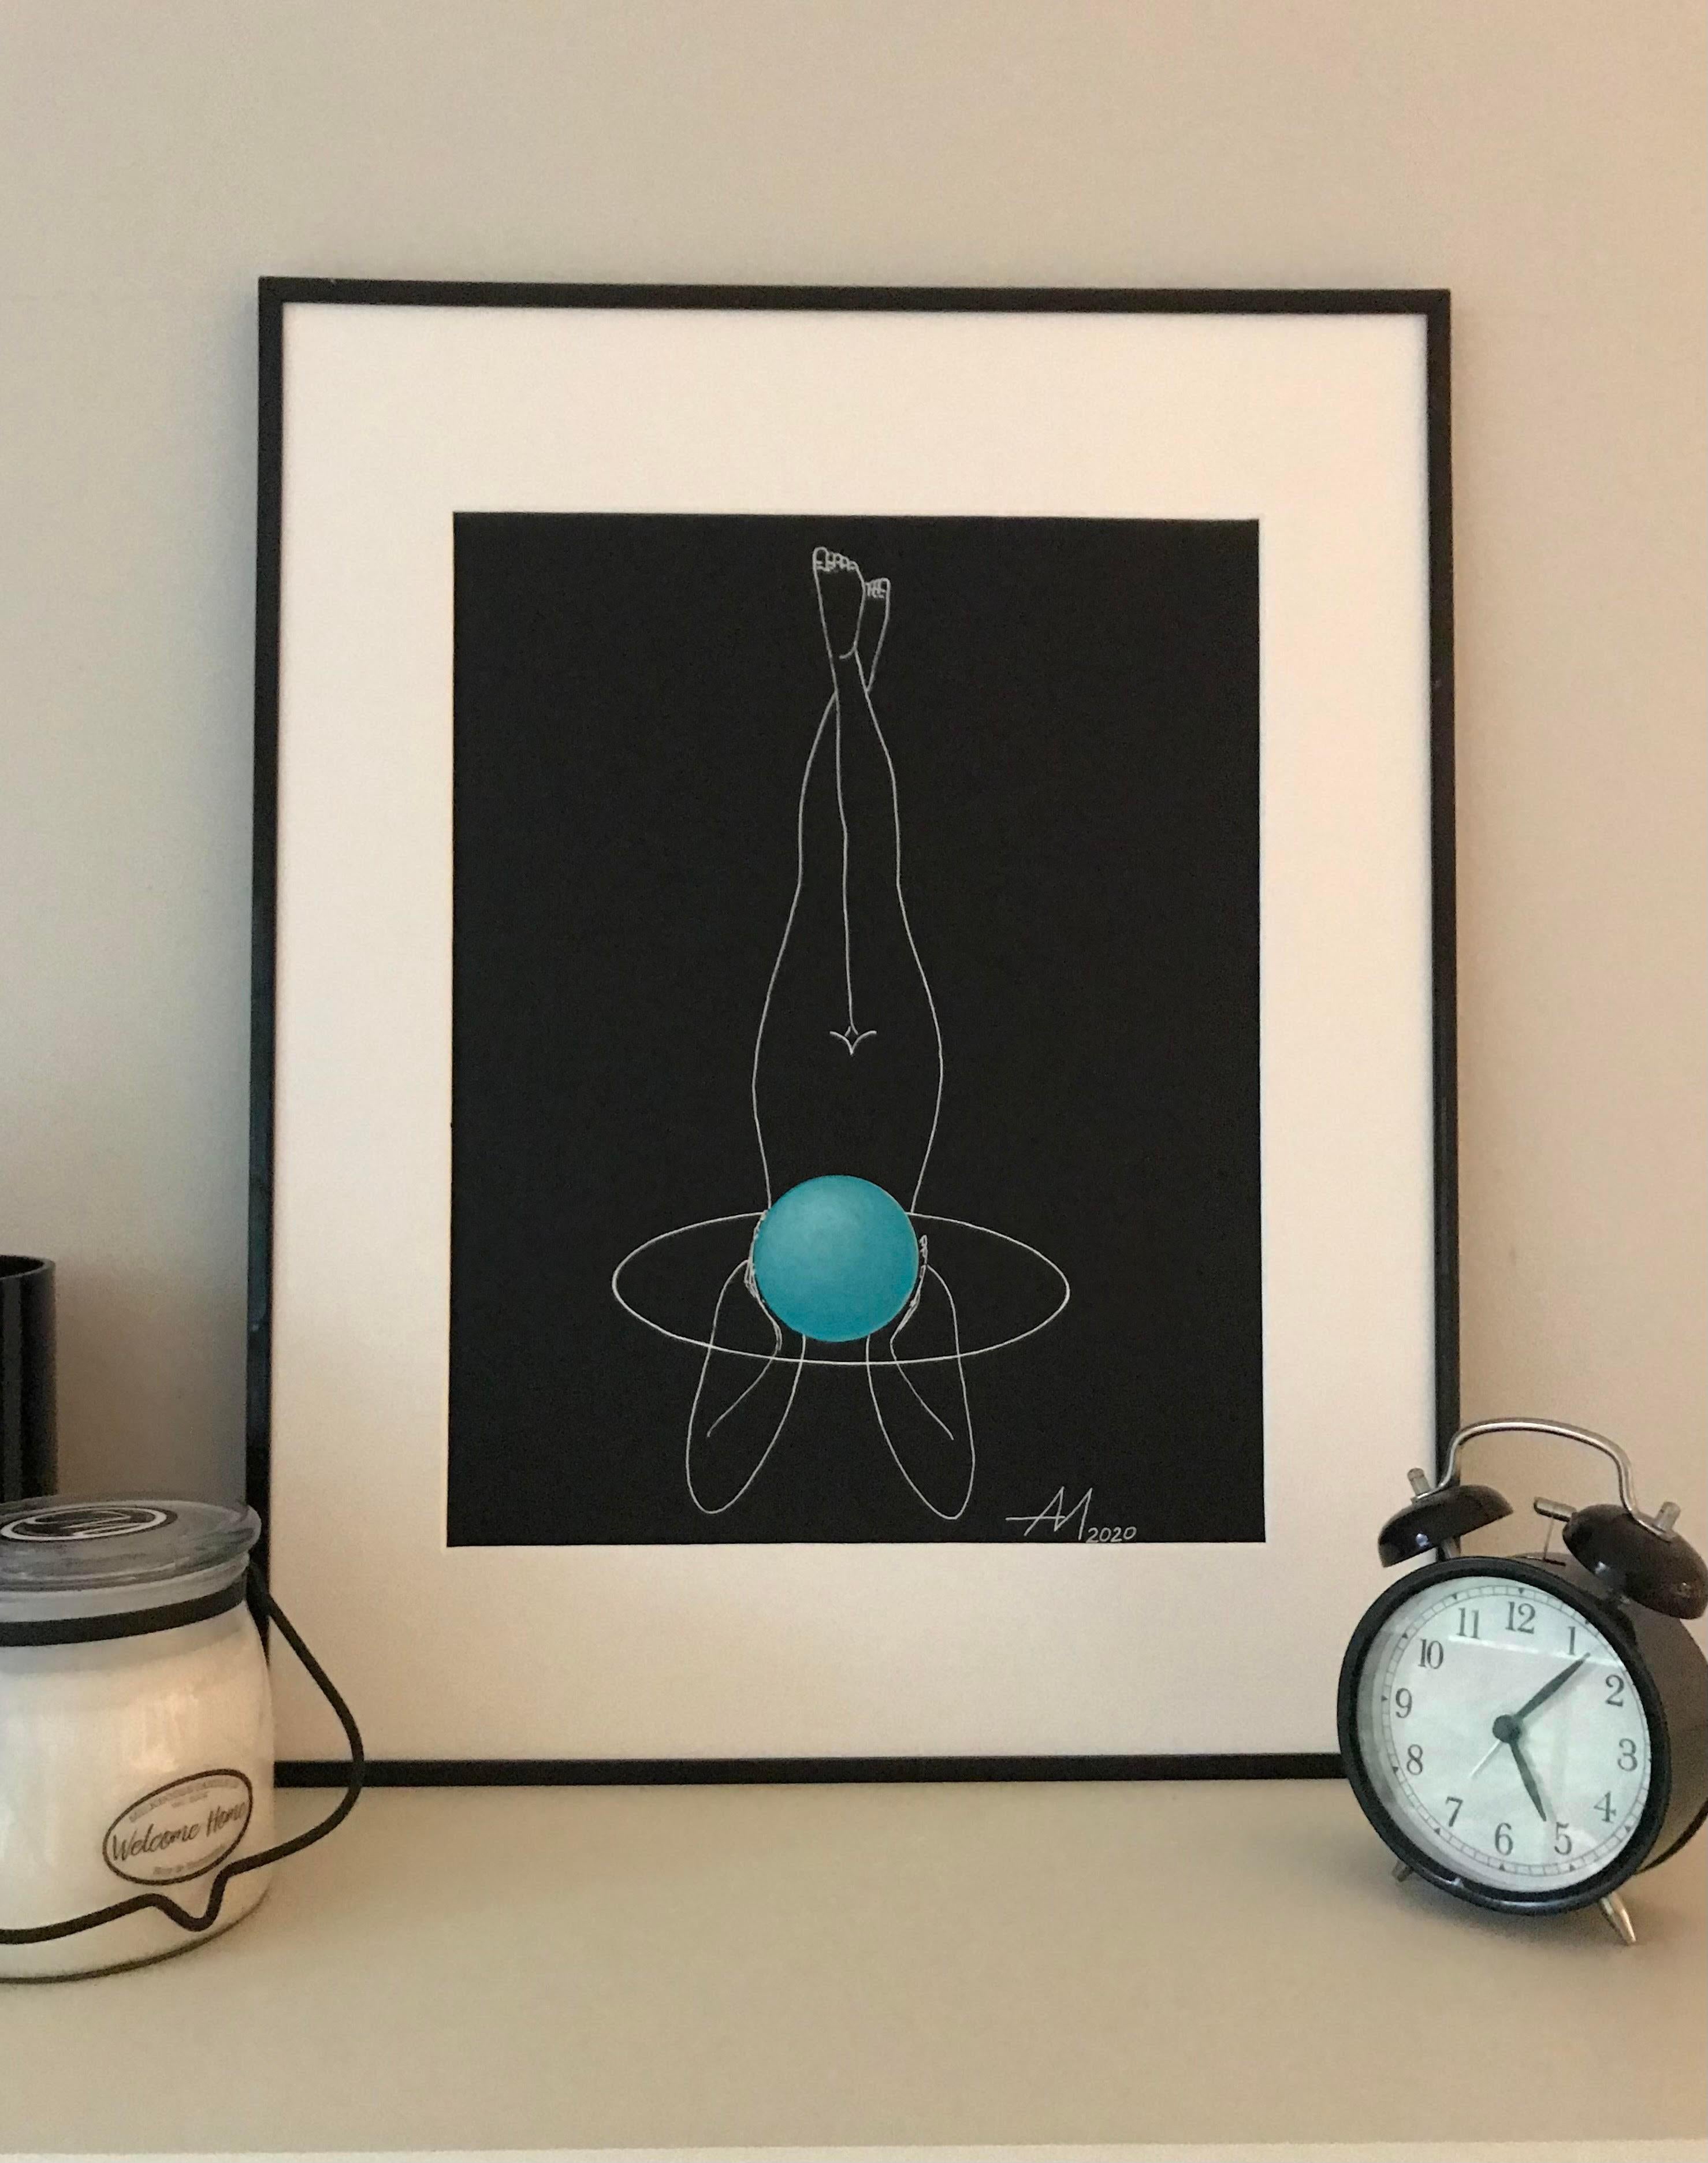 Outer orbit (planet) - line drawing woman figure with a  turquoise planet - Art by Mila Akopova